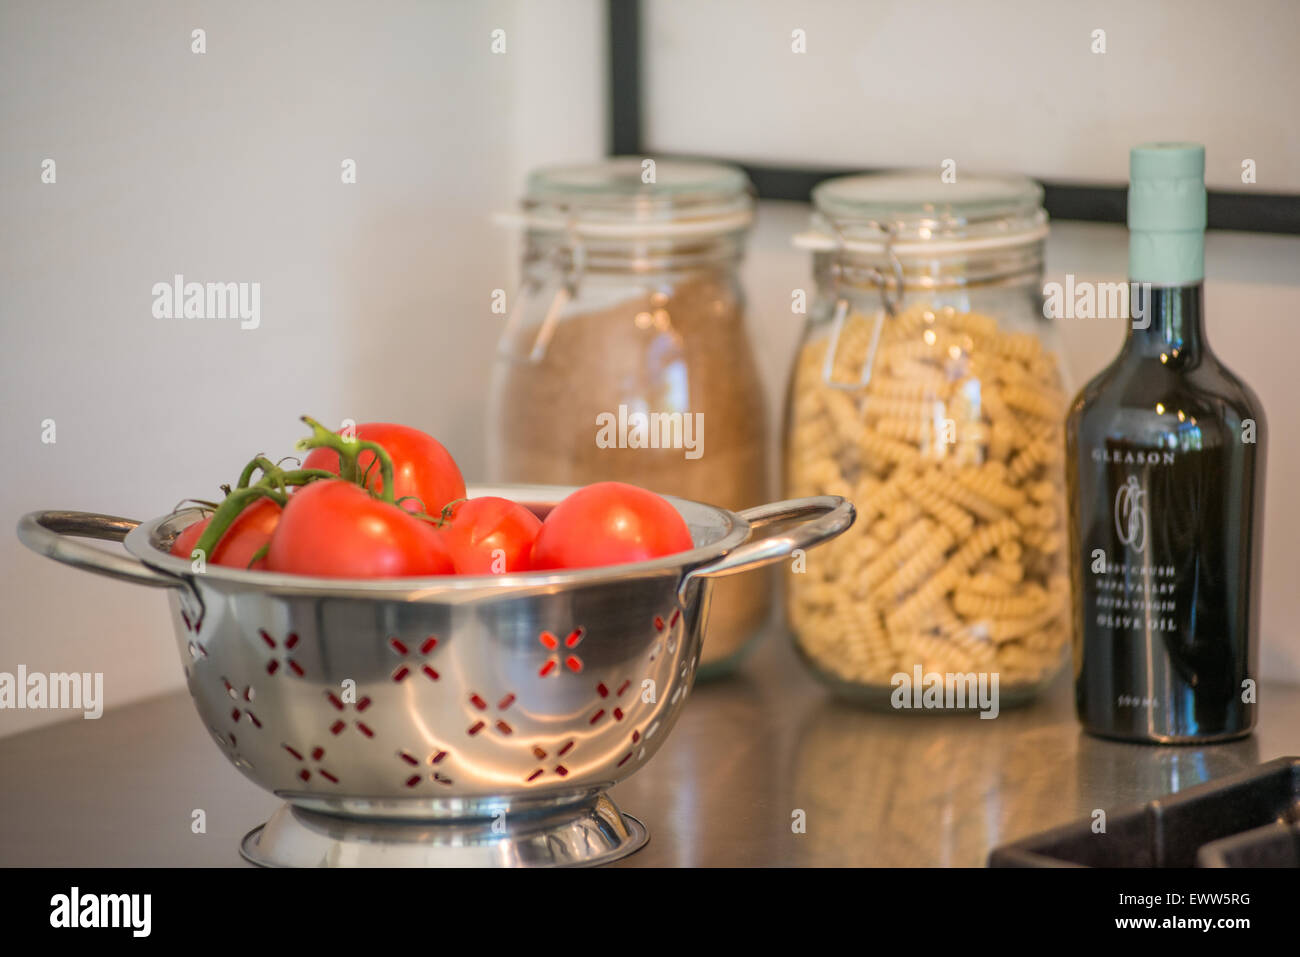 Colander containing ripe tomatoes, a bottle of olive oil, and a jar of rotini on a stainless steel kitchen countertop Stock Photo